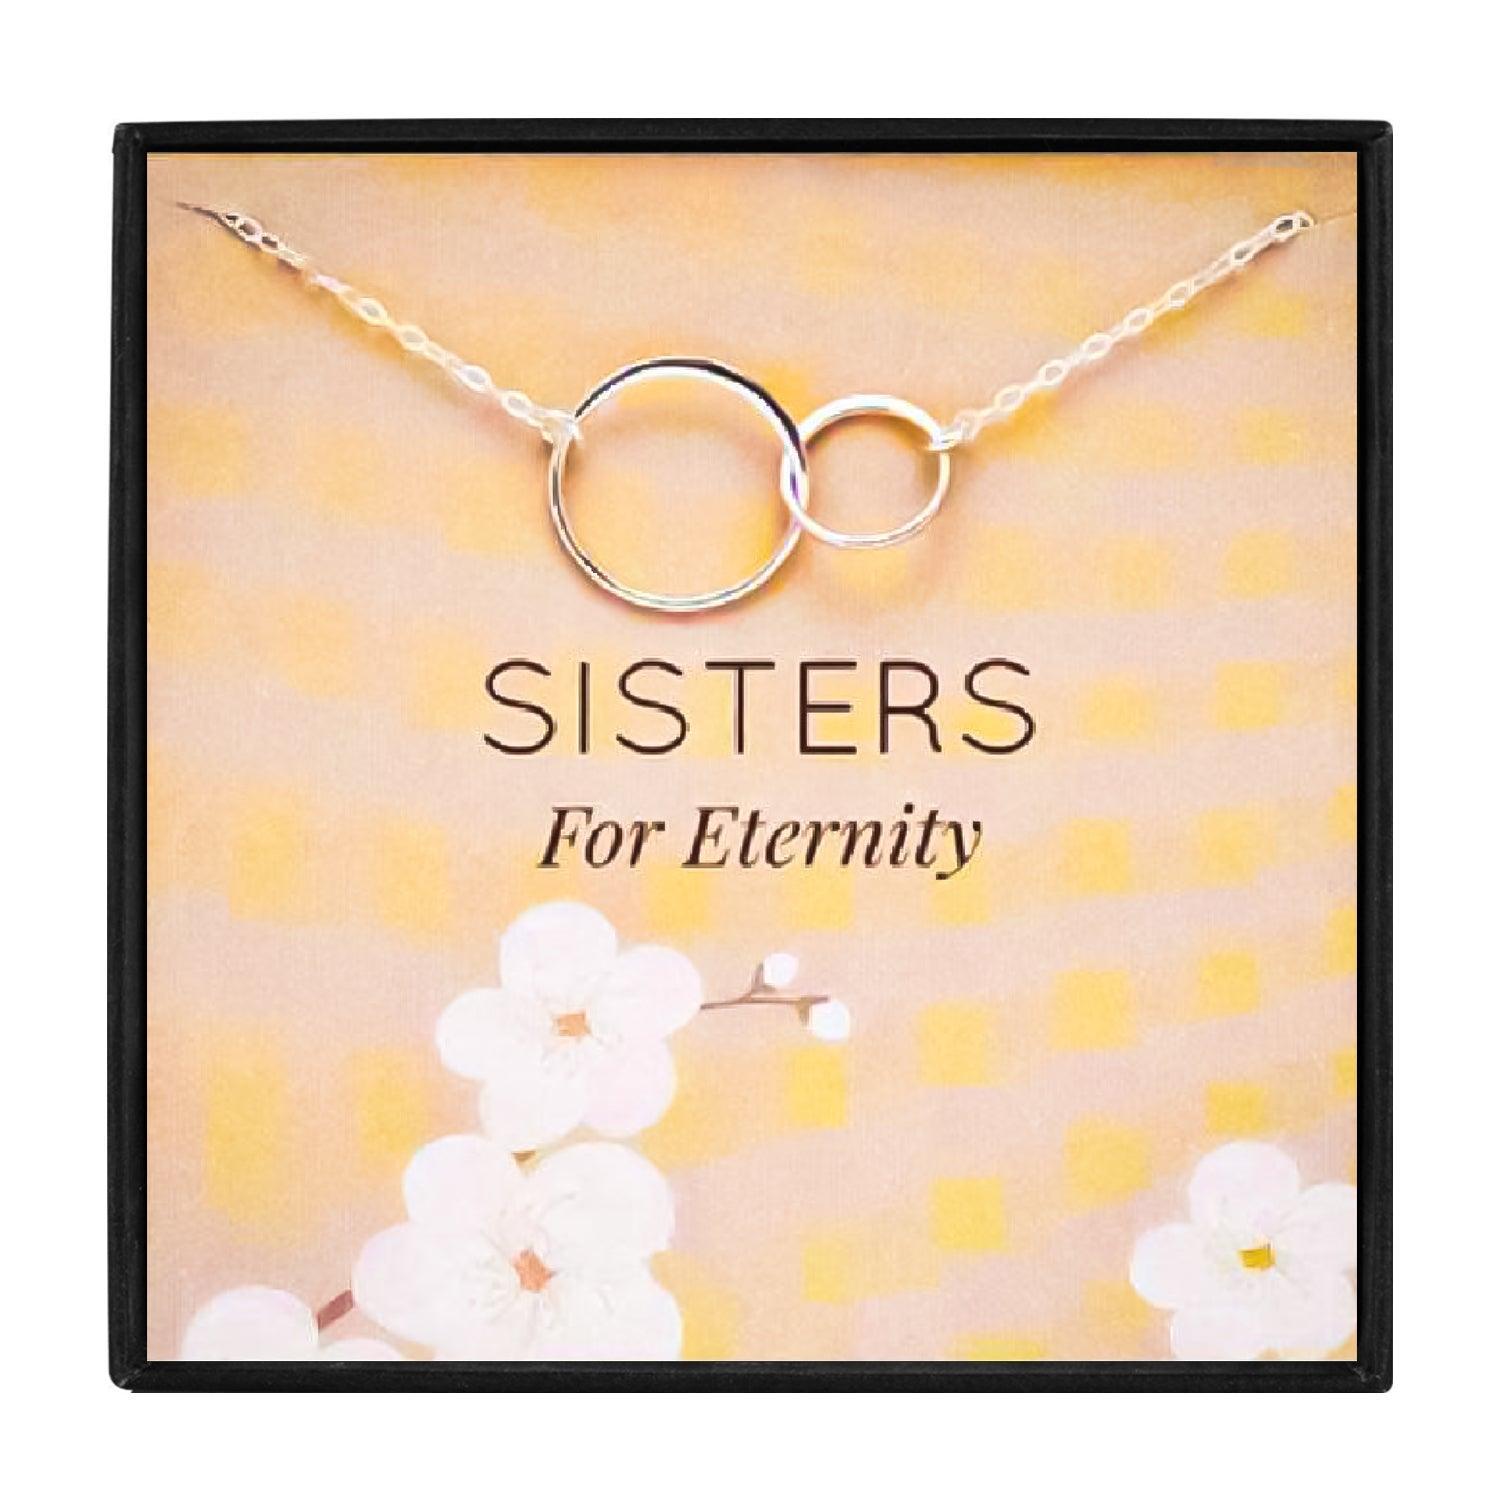 Double Circle Necklaces Gift For Sisters for Christmas 2023 | Double Circle Necklaces Gift For Sisters - undefined | gift for sister, gift ideas, necklace, Necklaces For Sisters, Sisters gift ideas | From Hunny Life | hunnylife.com